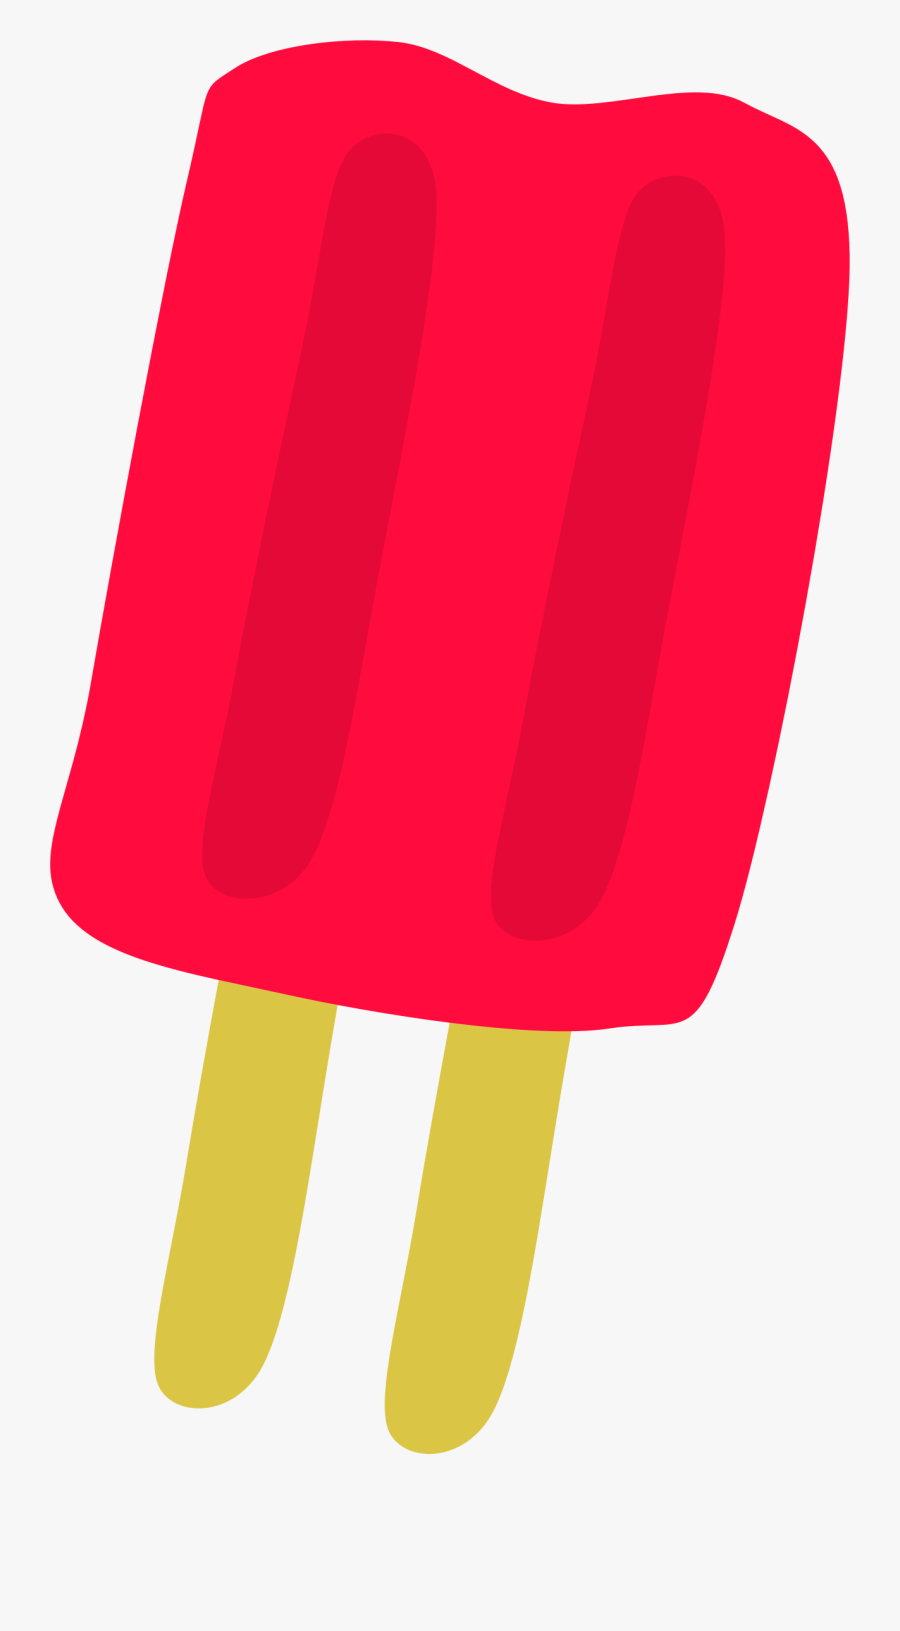 Stockphotopro Image For Popsicle Popsicle Clip Art - Popsicle Clipart, Transparent Clipart